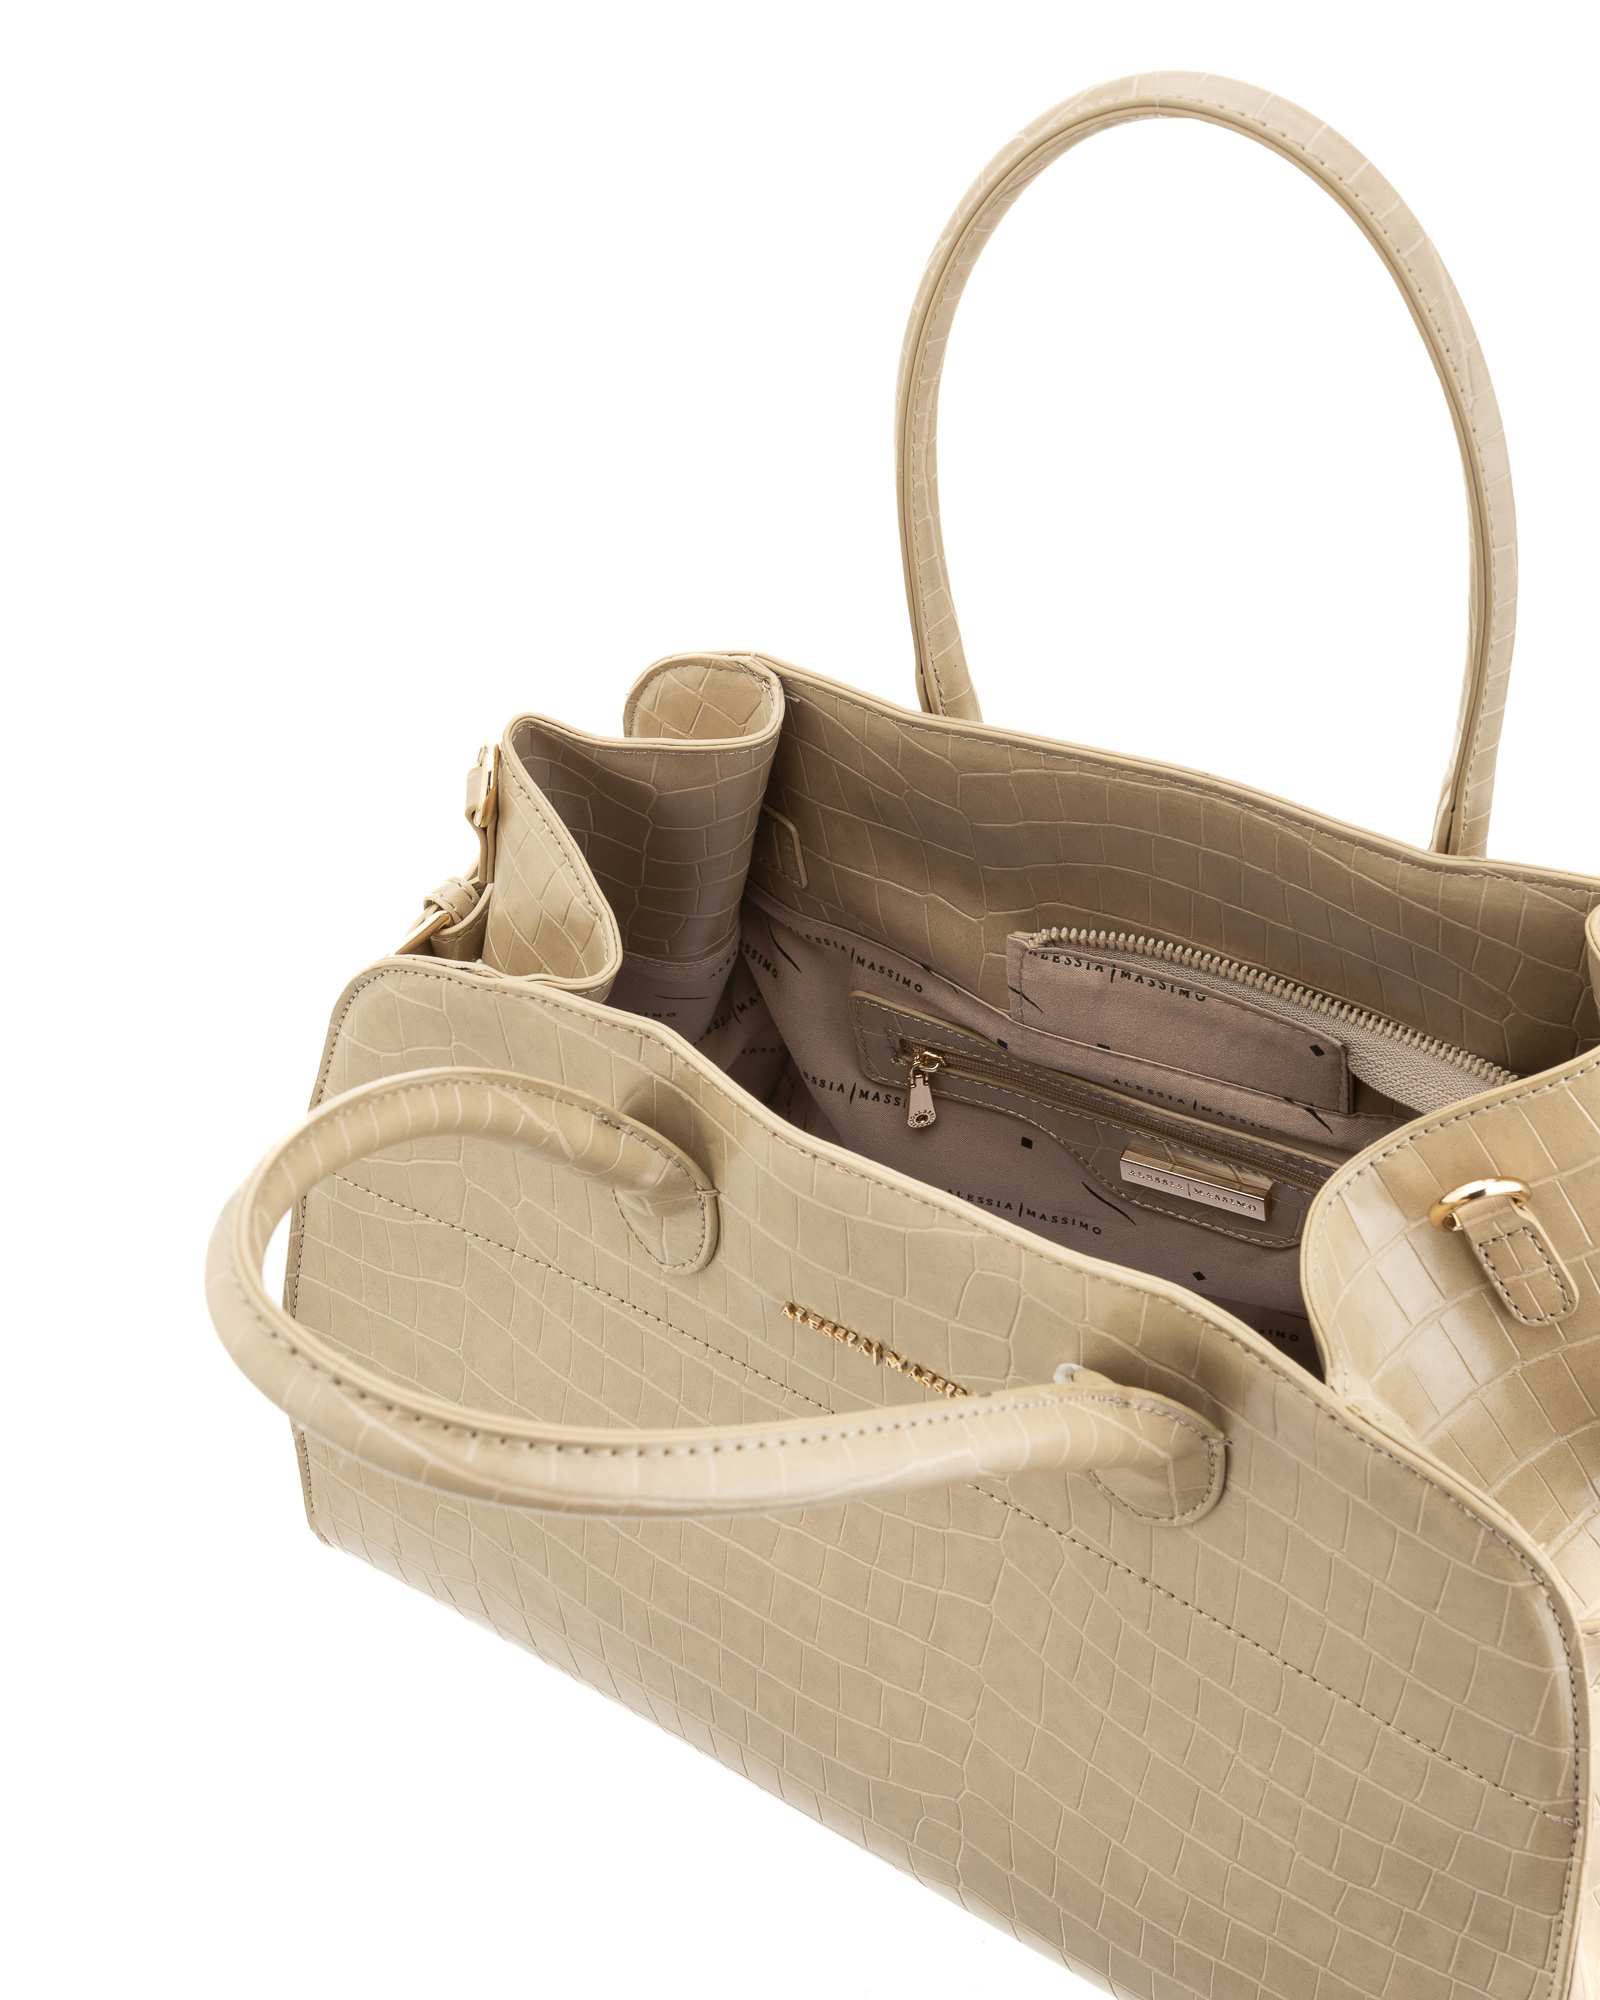 BAG TAUPE - STYLE1302